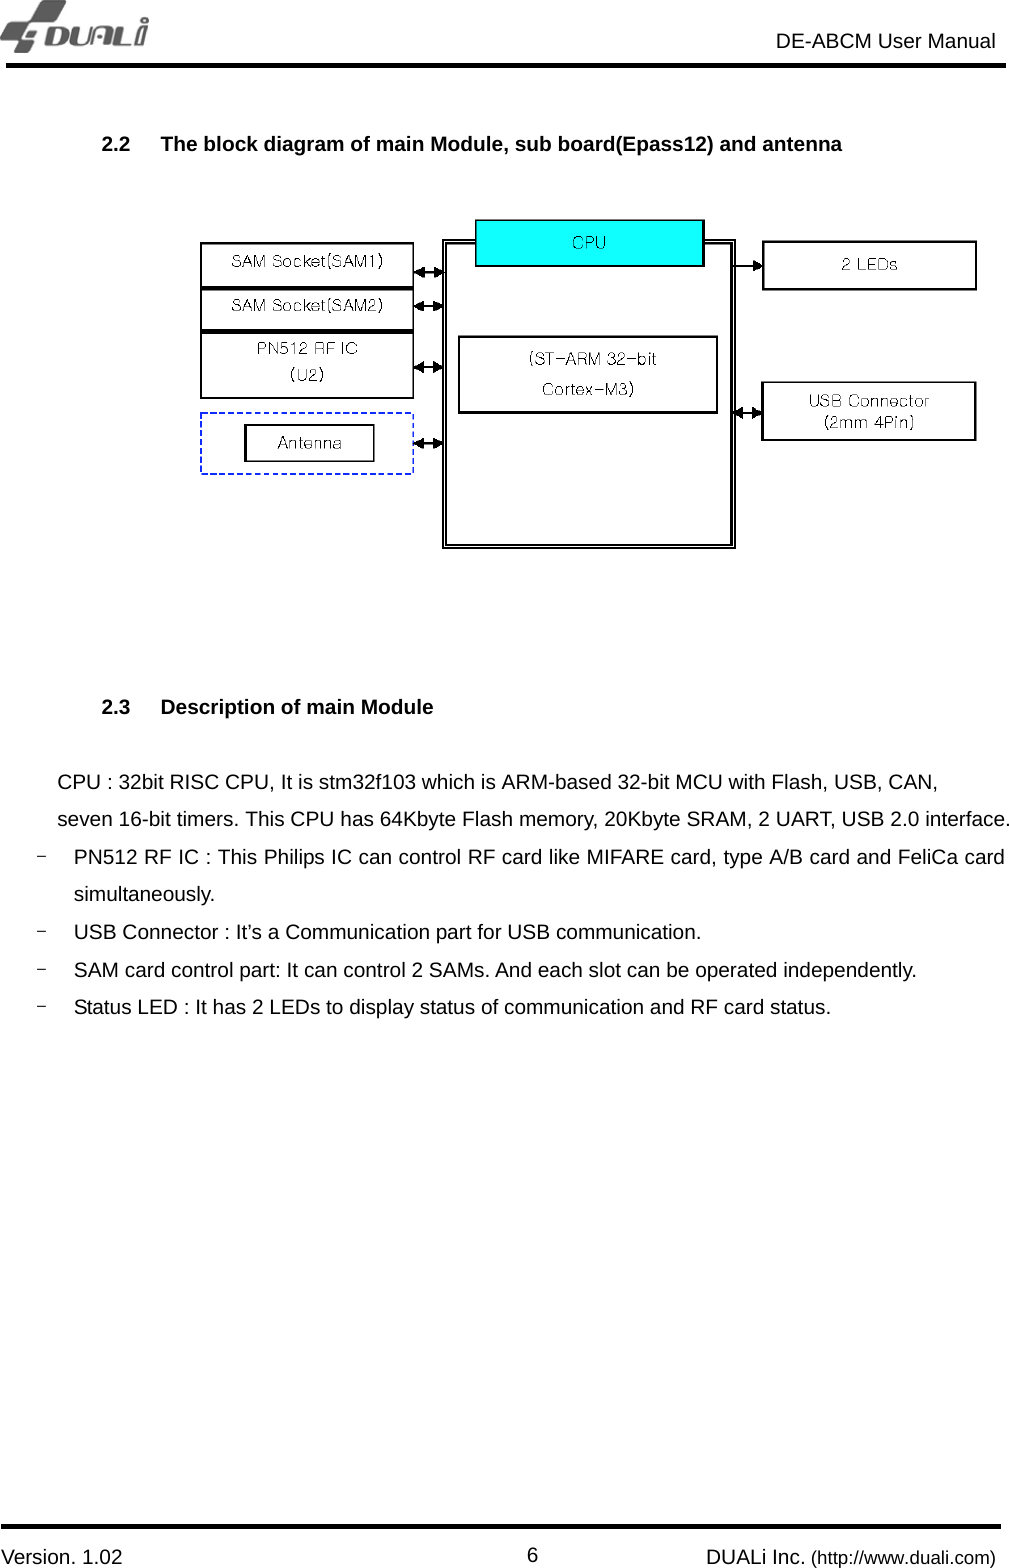                                                                       DE-ABCM User Manual                            Version. 1.02                                                        DUALi Inc. (http://www.duali.com)  62.2  The block diagram of main Module, sub board(Epass12) and antenna        2.3  Description of main Module    CPU : 32bit RISC CPU, It is stm32f103 which is ARM-based 32-bit MCU with Flash, USB, CAN, seven 16-bit timers. This CPU has 64Kbyte Flash memory, 20Kbyte SRAM, 2 UART, USB 2.0 interface. -  PN512 RF IC : This Philips IC can control RF card like MIFARE card, type A/B card and FeliCa card simultaneously.  -  USB Connector : It’s a Communication part for USB communication.   -  SAM card control part: It can control 2 SAMs. And each slot can be operated independently. -  Status LED : It has 2 LEDs to display status of communication and RF card status. 